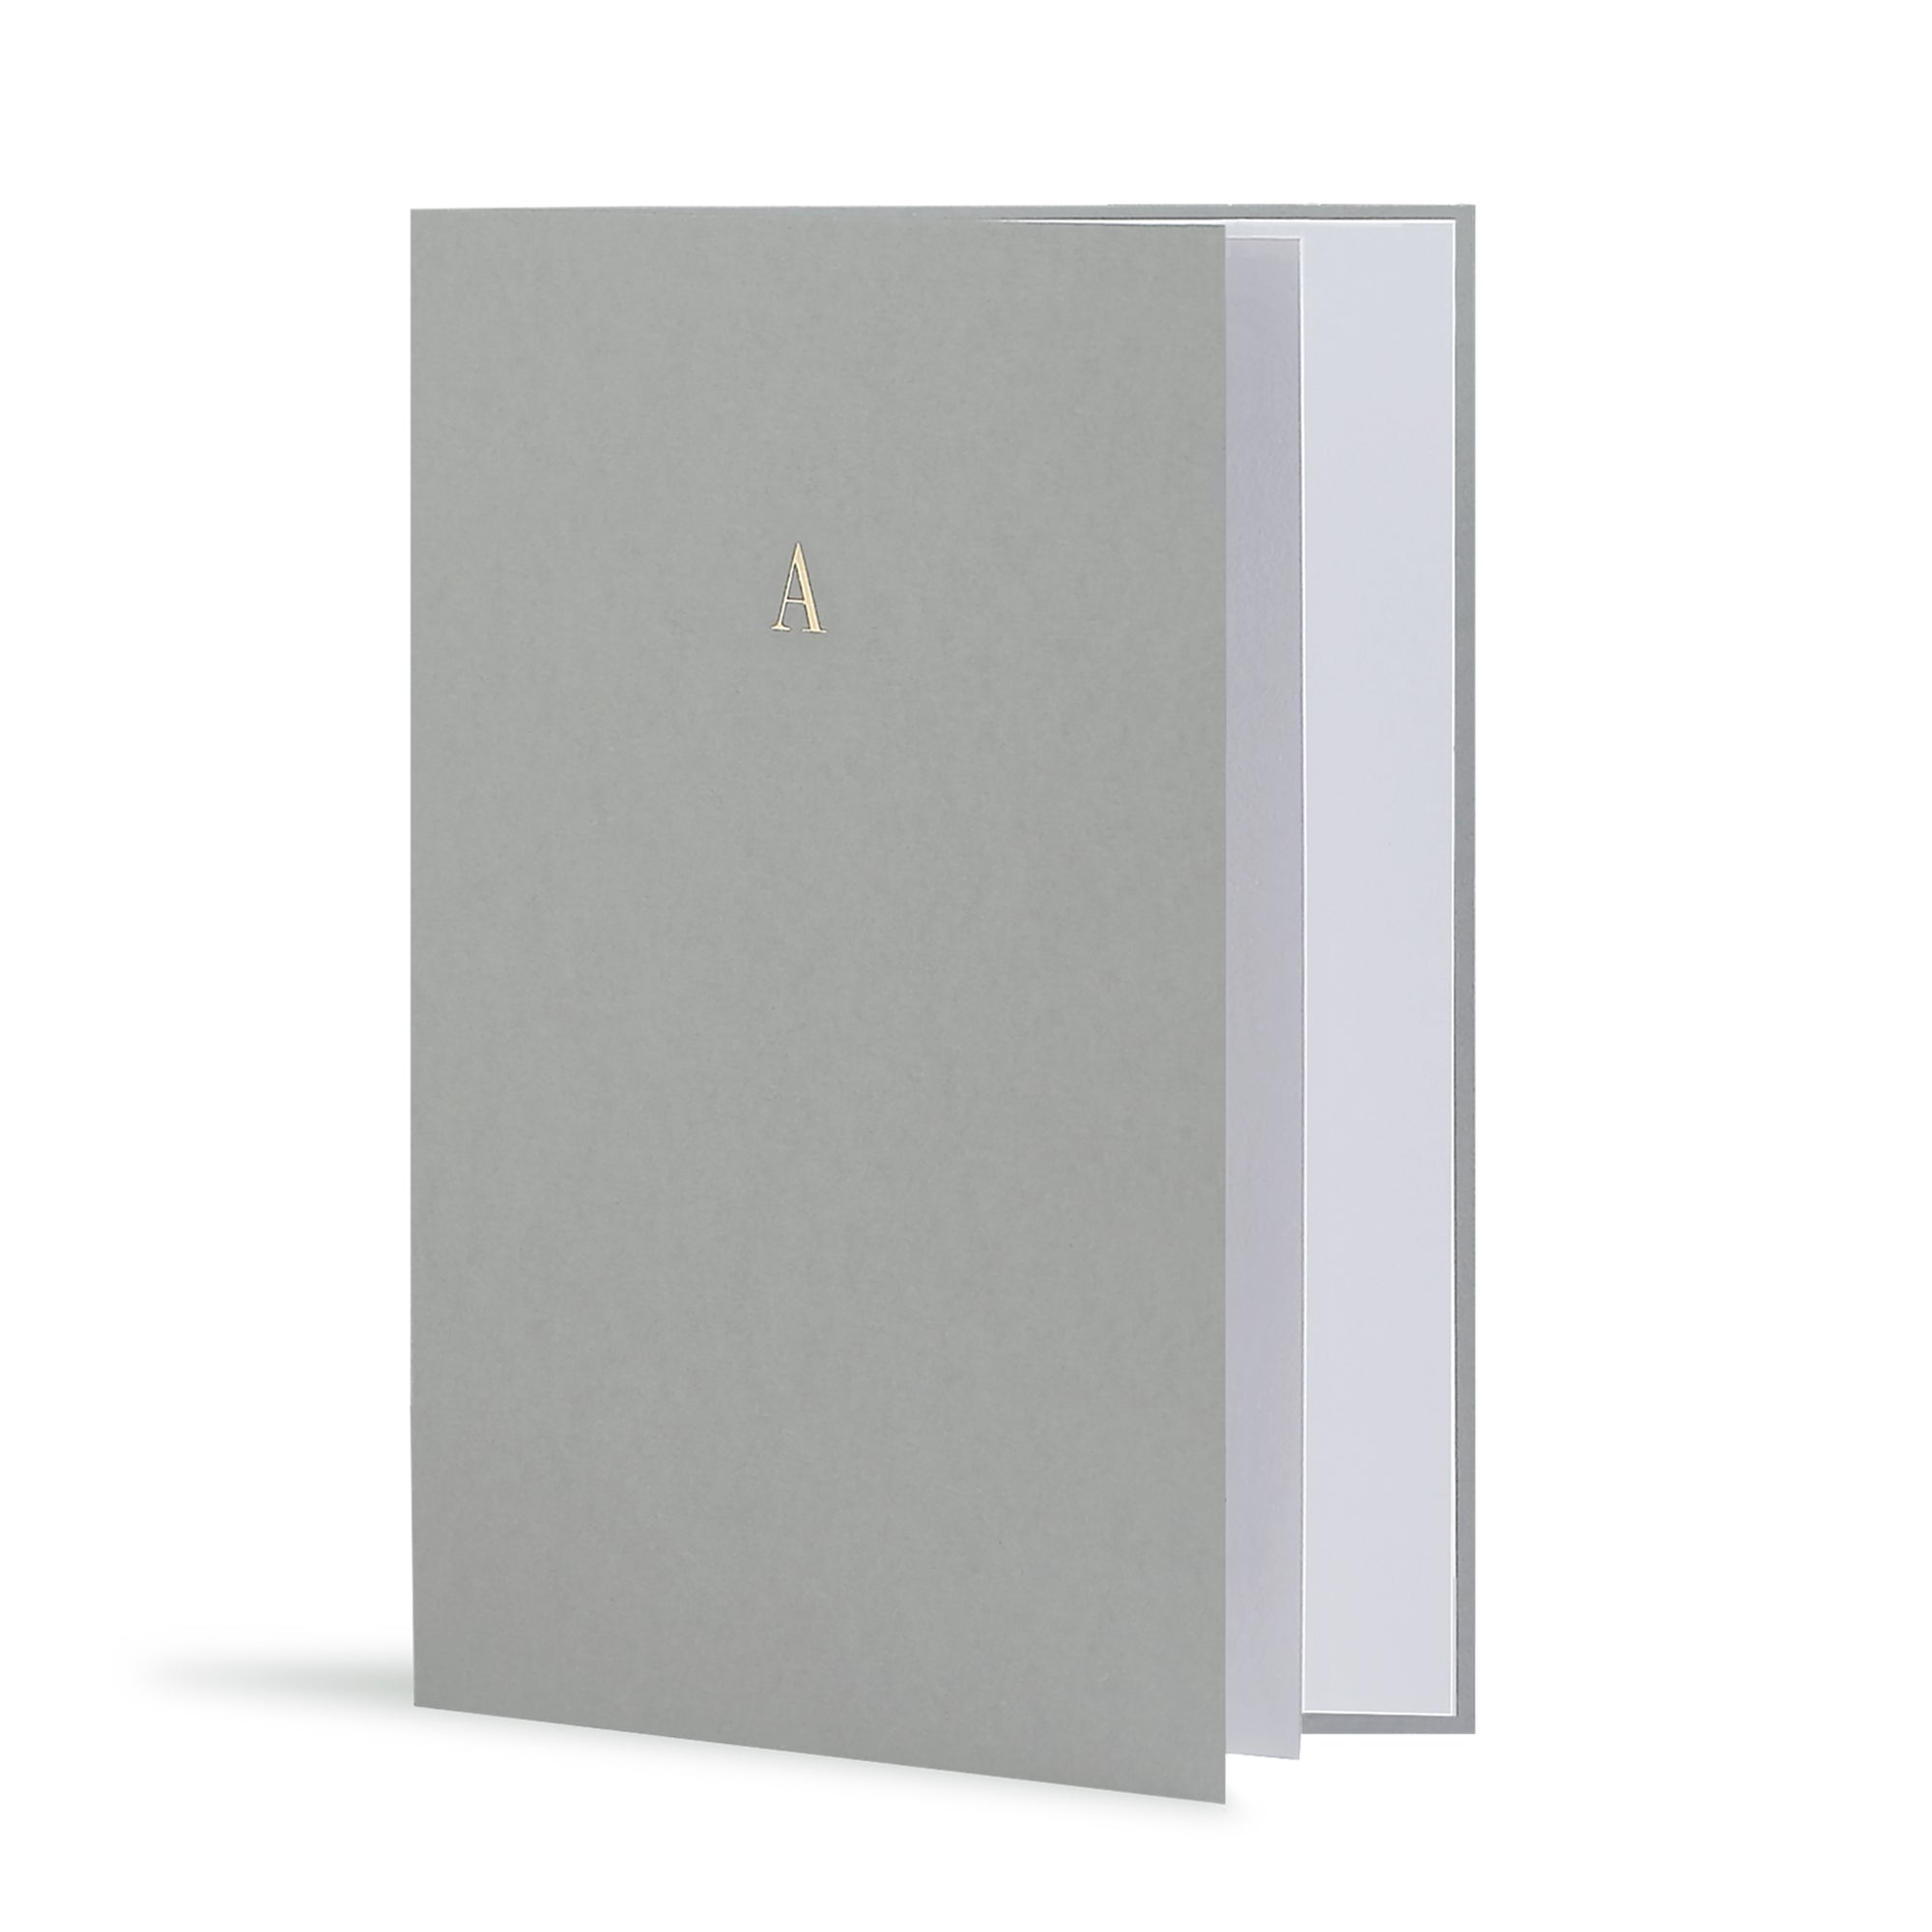 A Greeting Card in Grey, Side | Story of Elegance